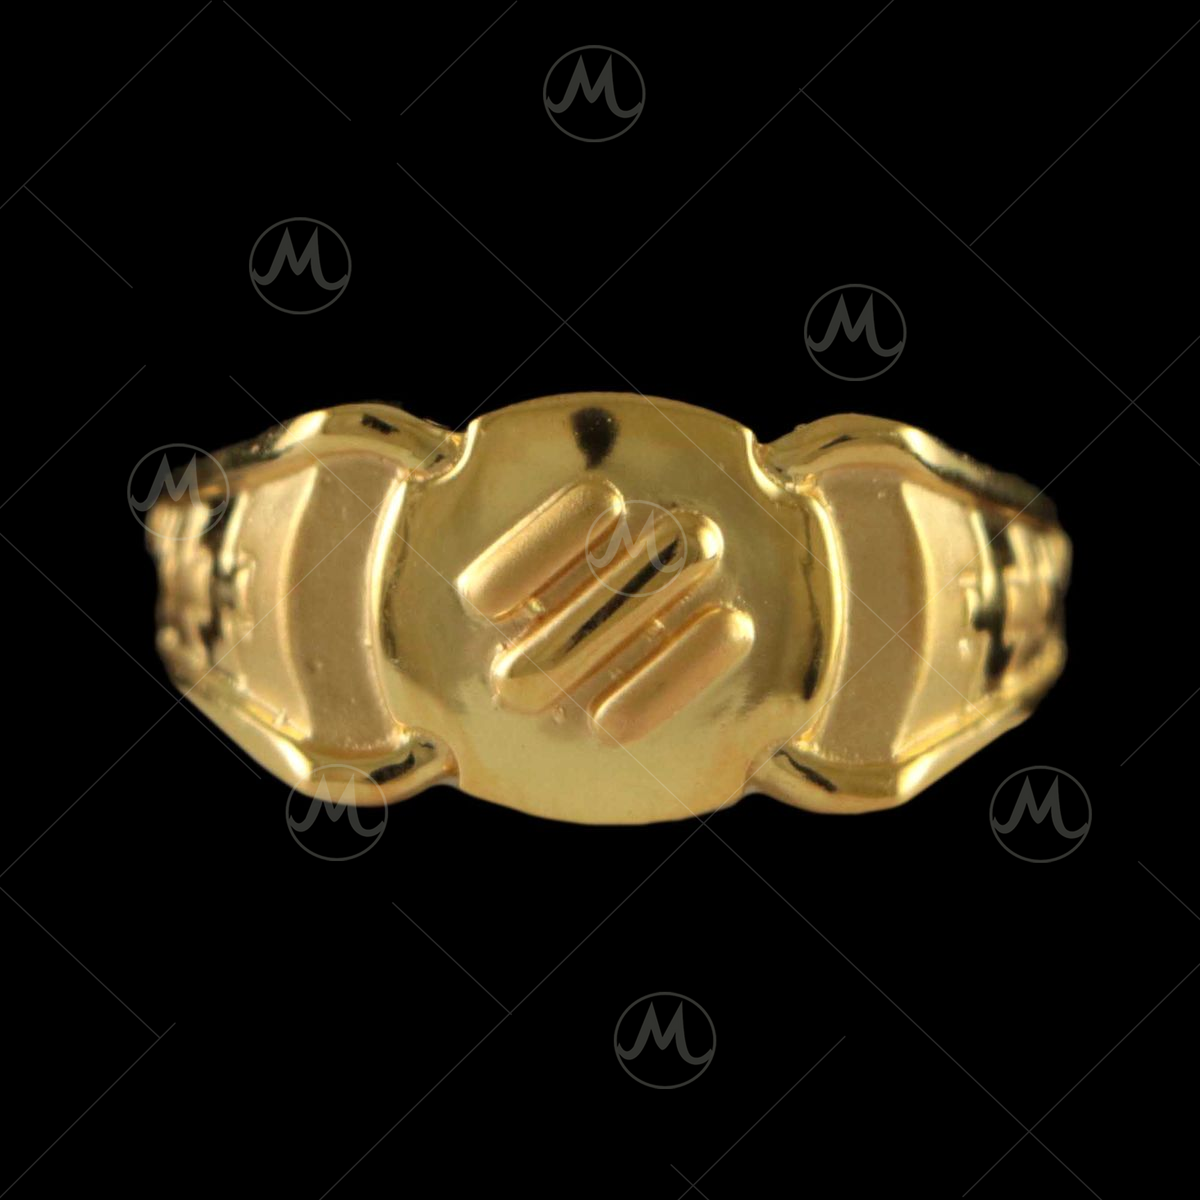 Buy quality 22 kt gold casting fancy couple rings in Ahmedabad